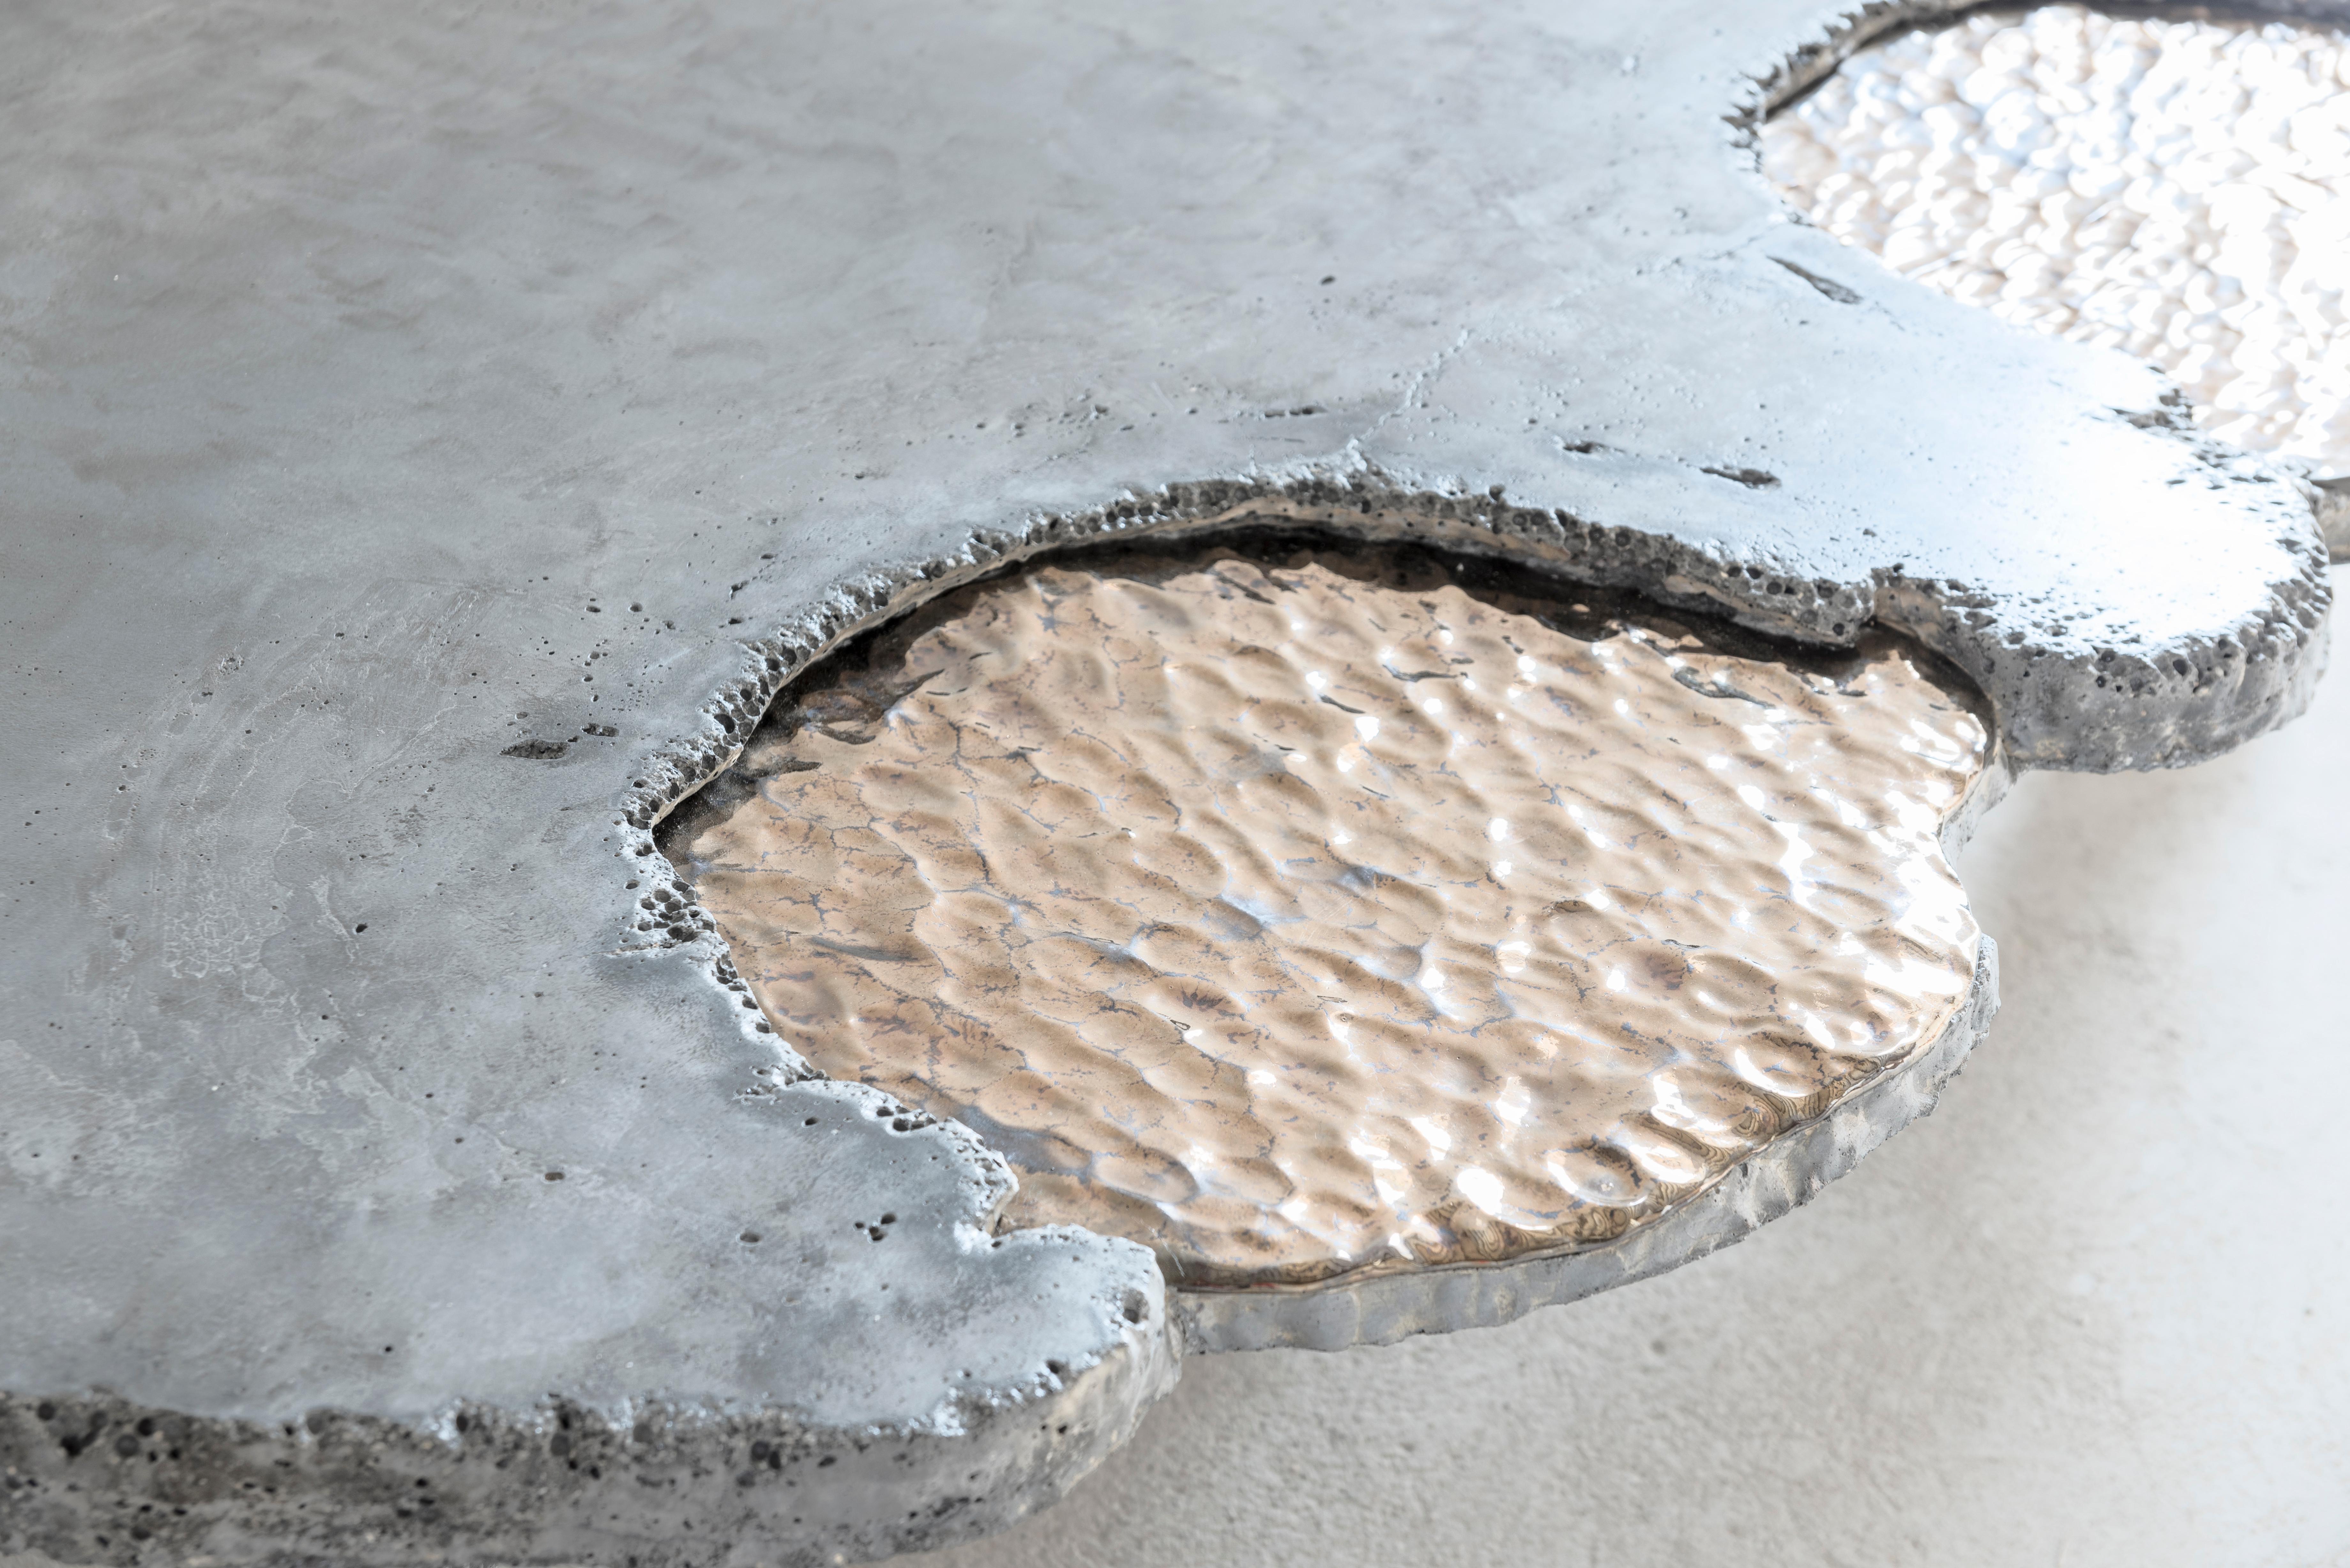 Rodrigo Pinto

Coffee table
From the series “Tierras Hipnóticas” (Hypnopompic lands)
Manufactured by Rodrigo Pinto
Santiago de Chile, 2020
Produced in exclusive for Side Gallery
Concrete consisting of marble grains, stone carbonates, copper